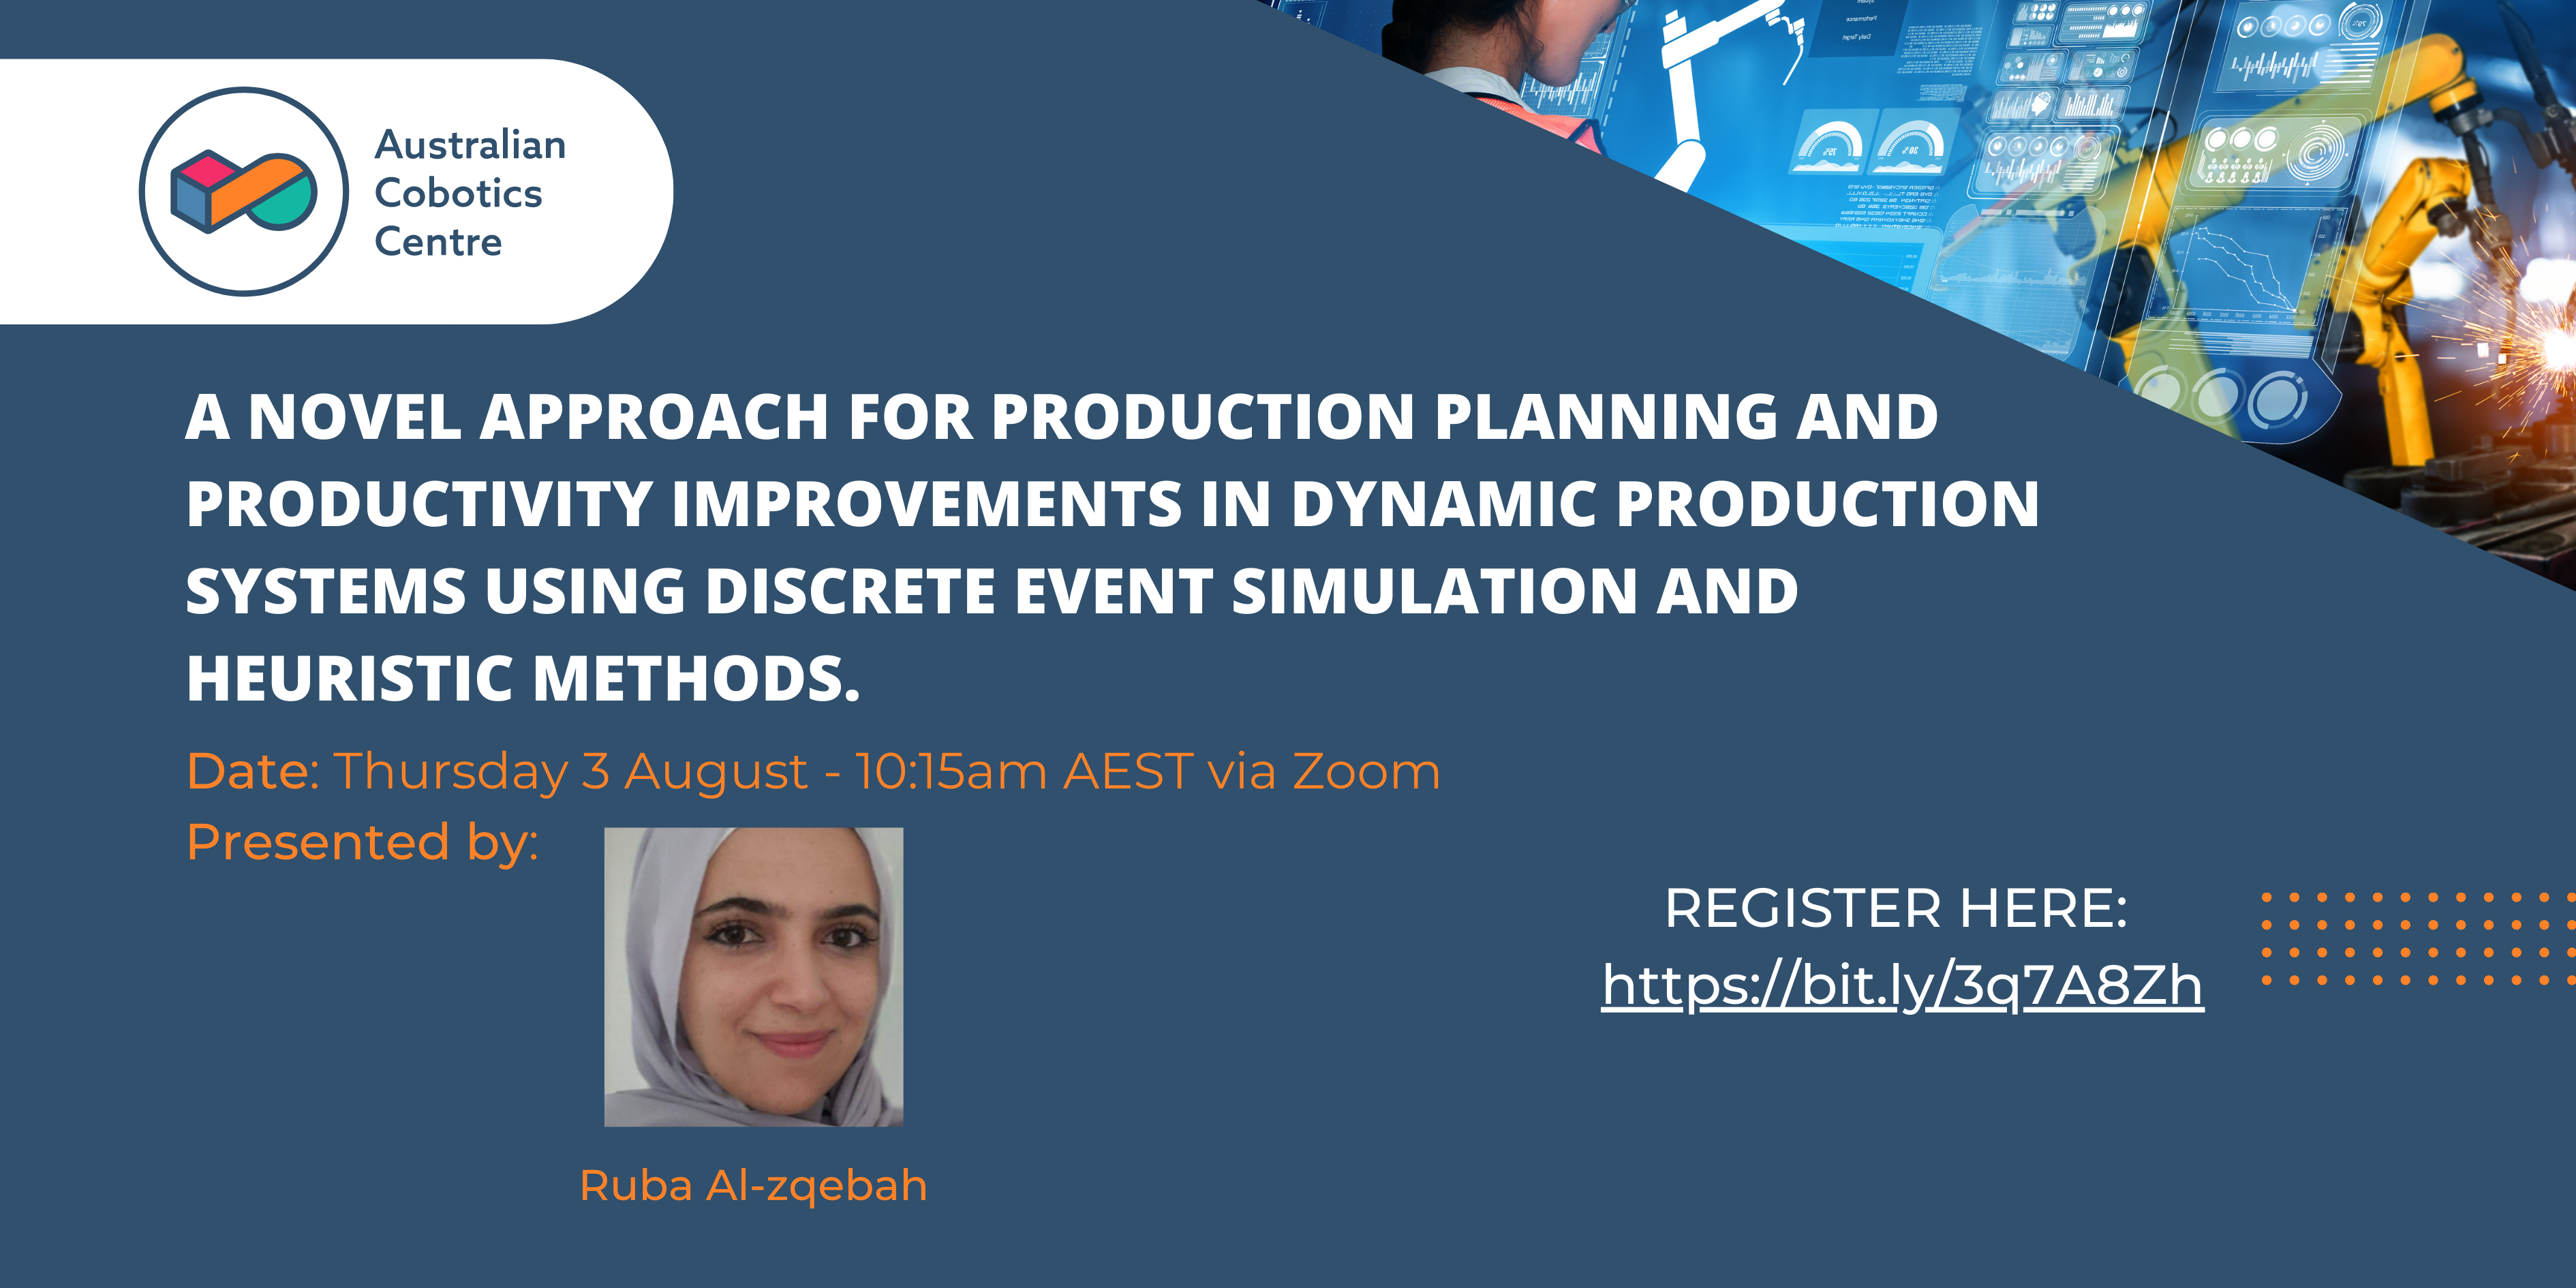 Seminar Series: A Novel Approach for Production Planning and Productivity Improvements in Dynamic Production Systems using Discrete Event Simulation and Heuristic Methods.